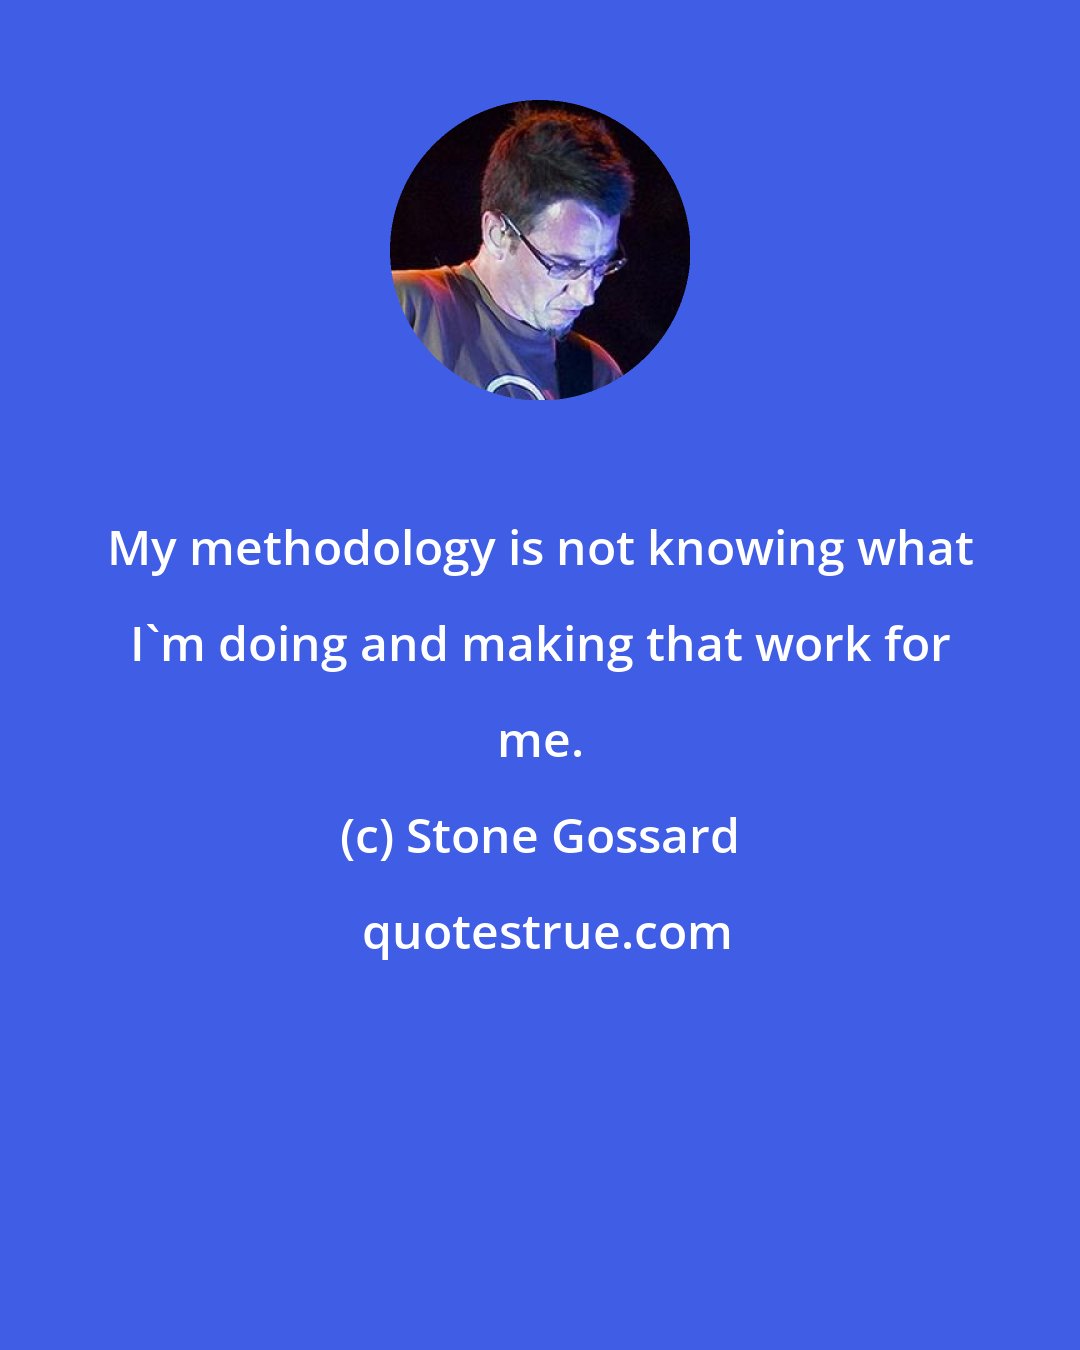 Stone Gossard: My methodology is not knowing what I'm doing and making that work for me.